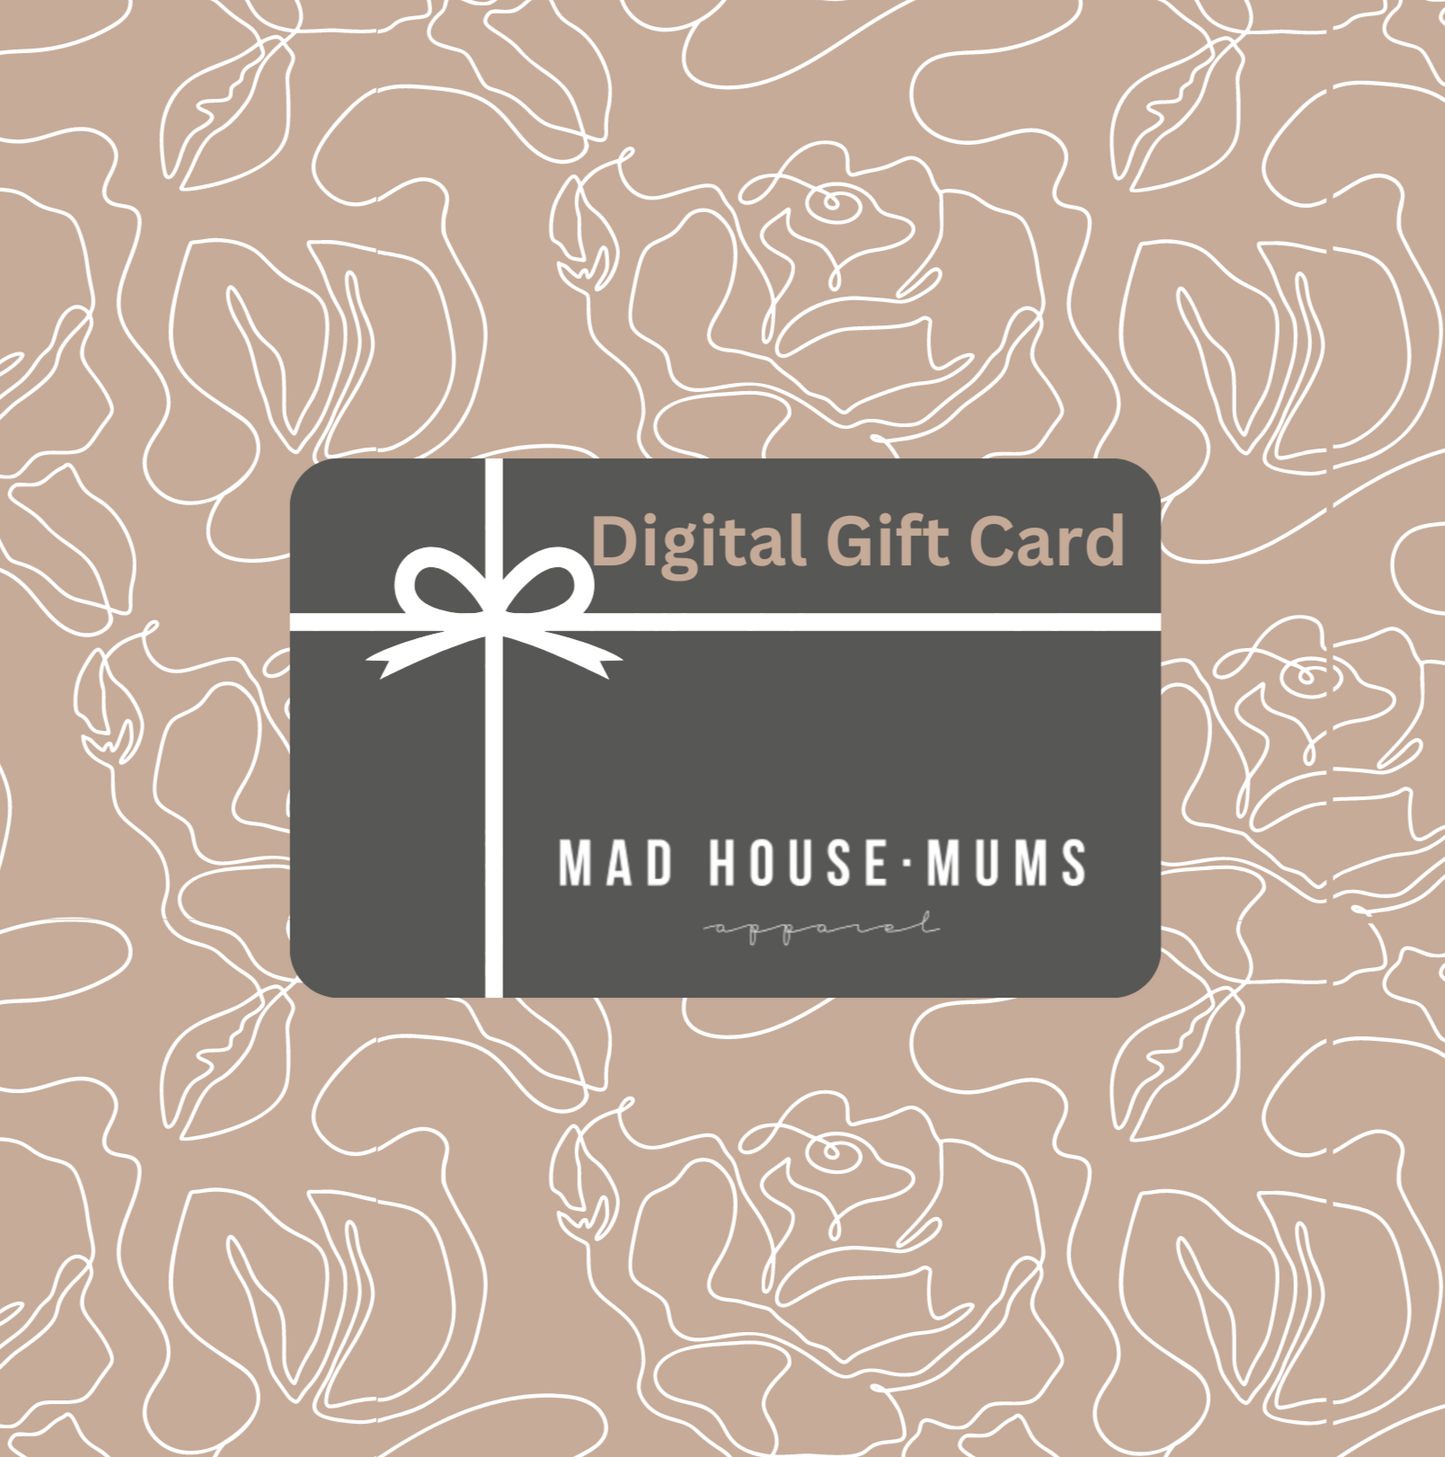 Mad House Mums Digital Gift Card